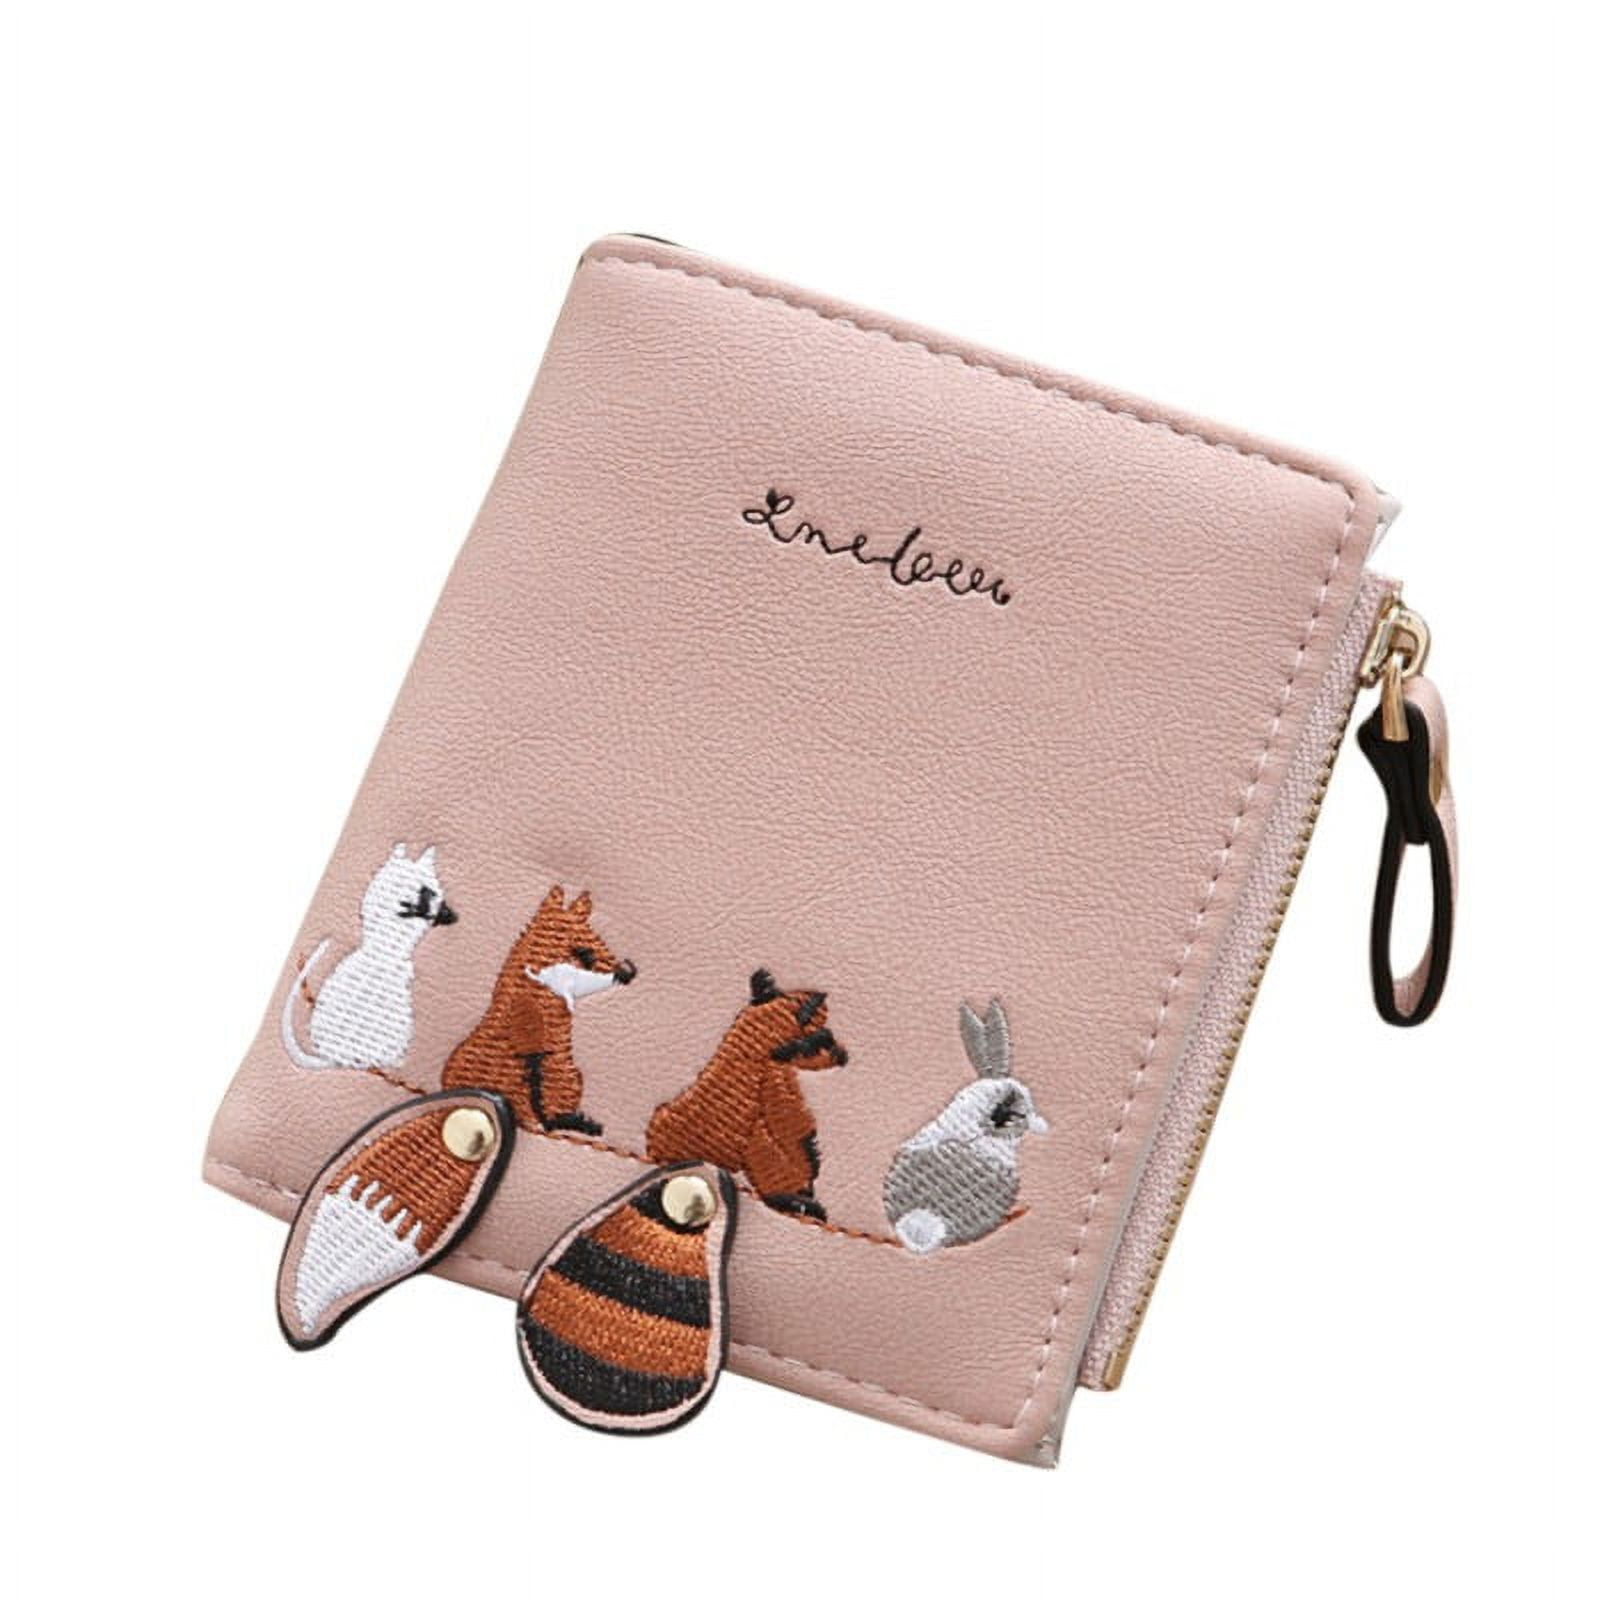 Luxury Designer Top Quality Soft Card Holder Genuine Leather Marmont G Purse  Fashion Y Womens Men Purses Mens Key Ring Credit Coin Mini Wallet Bag Charm  Brown Canvas From Akend, $14.01